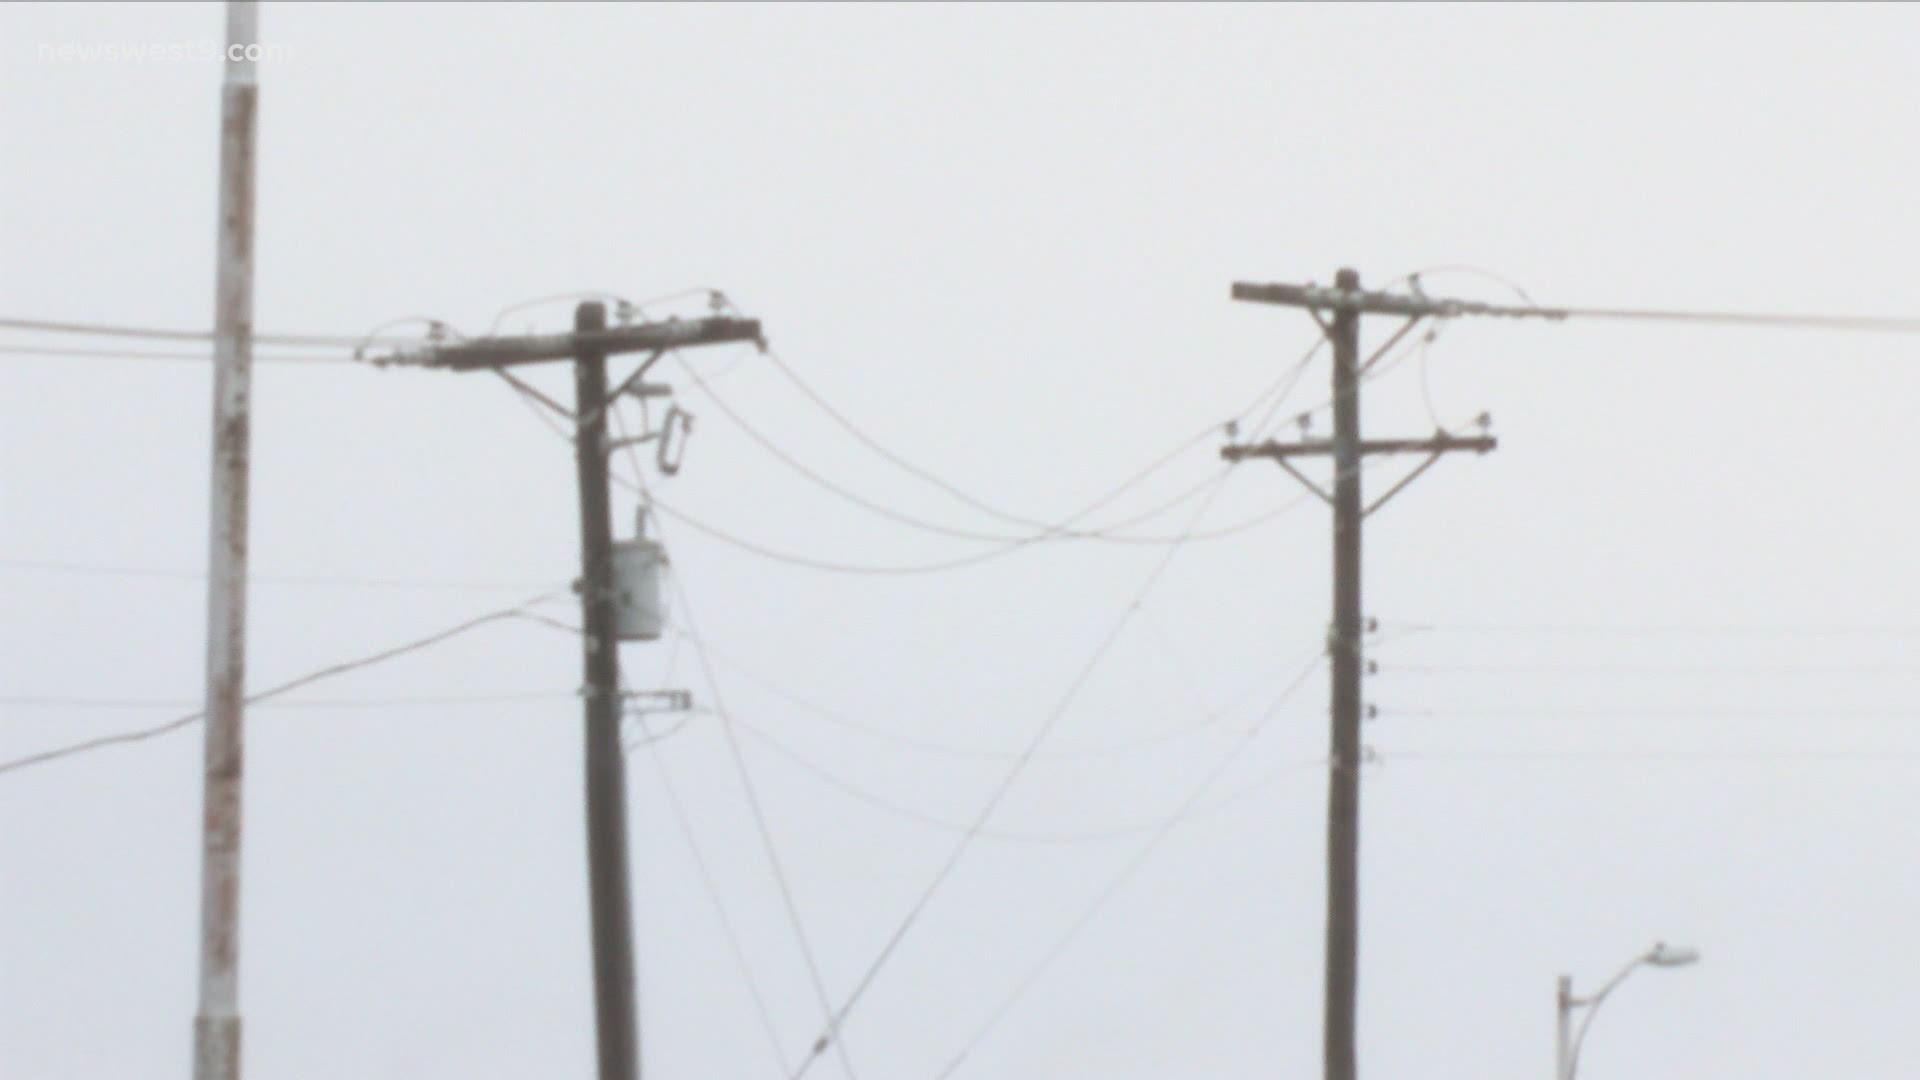 As ERCOT performs rolling outages across the state to preserve power, here's how you can help.